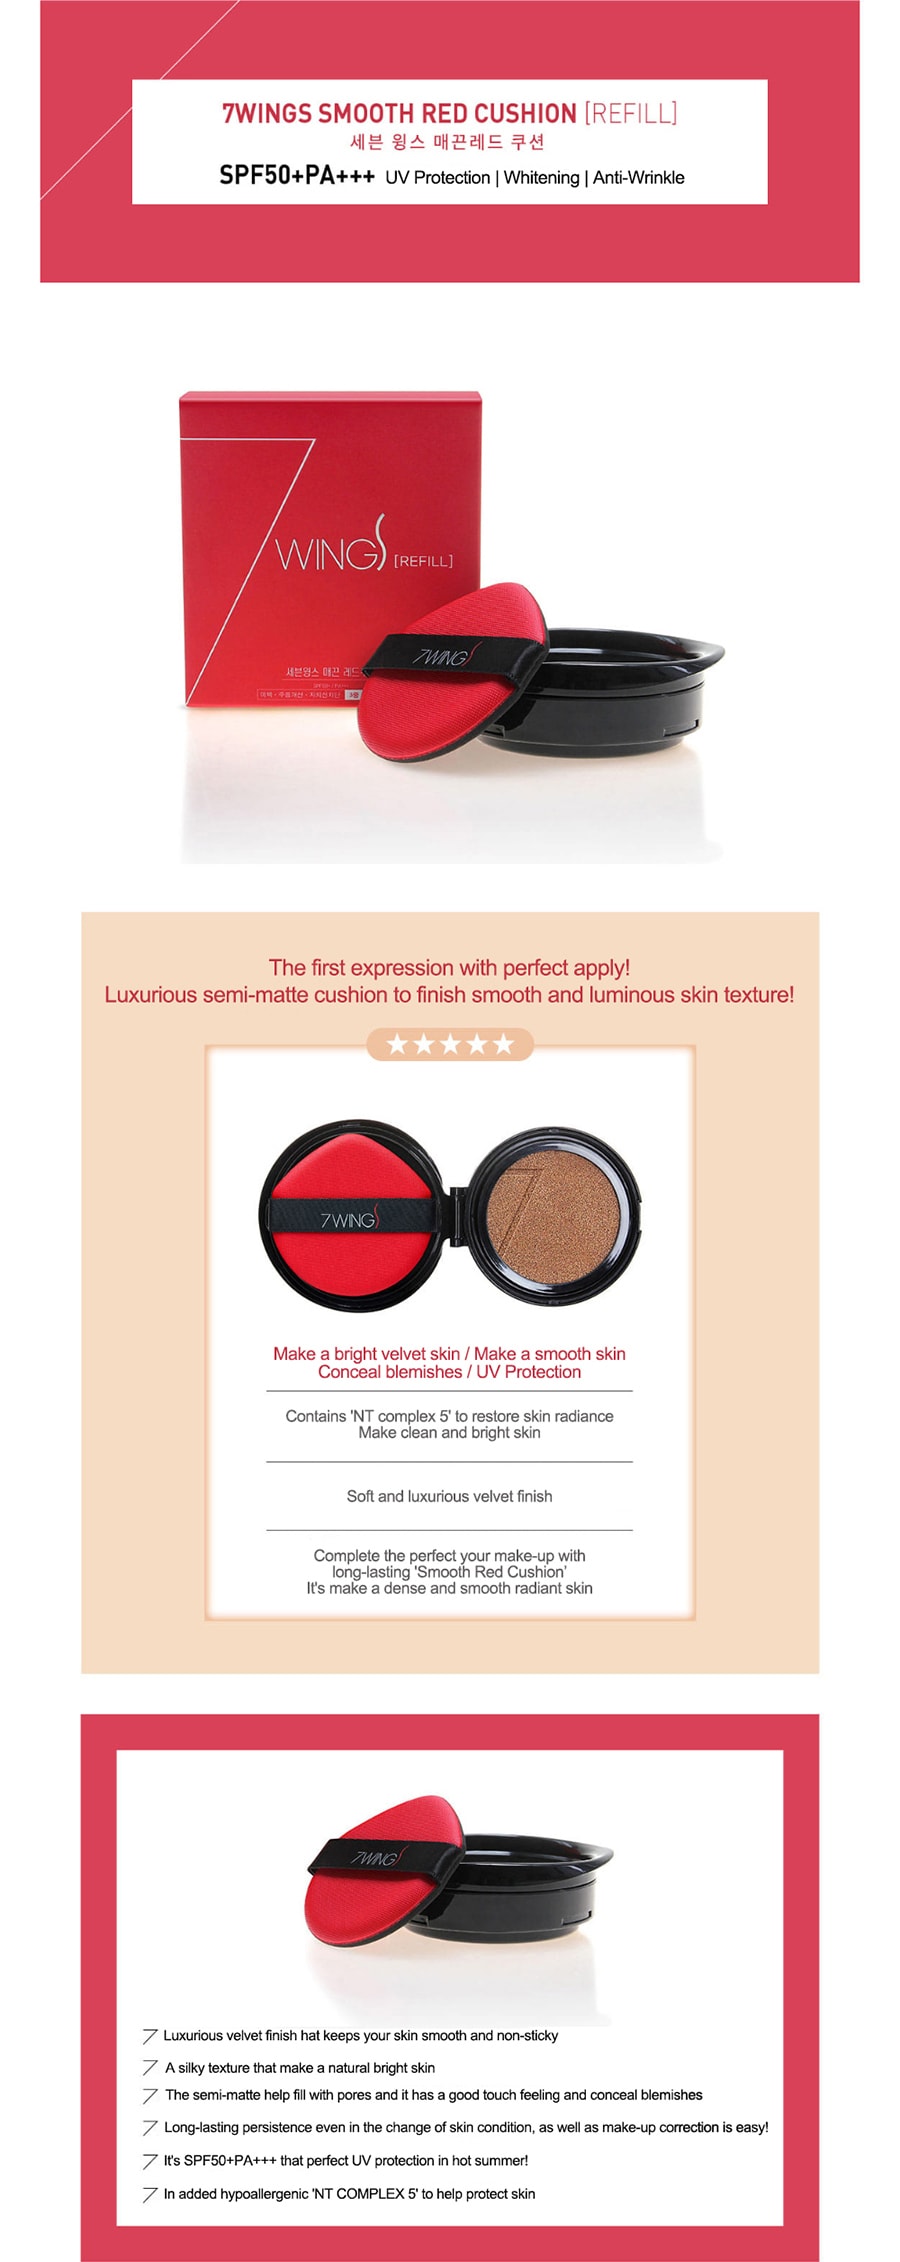 7WINGS Smooth Red Cushion Foundation (SPF 50+/PA+++) 28g(14g +Refill 14g) #No.21 Light